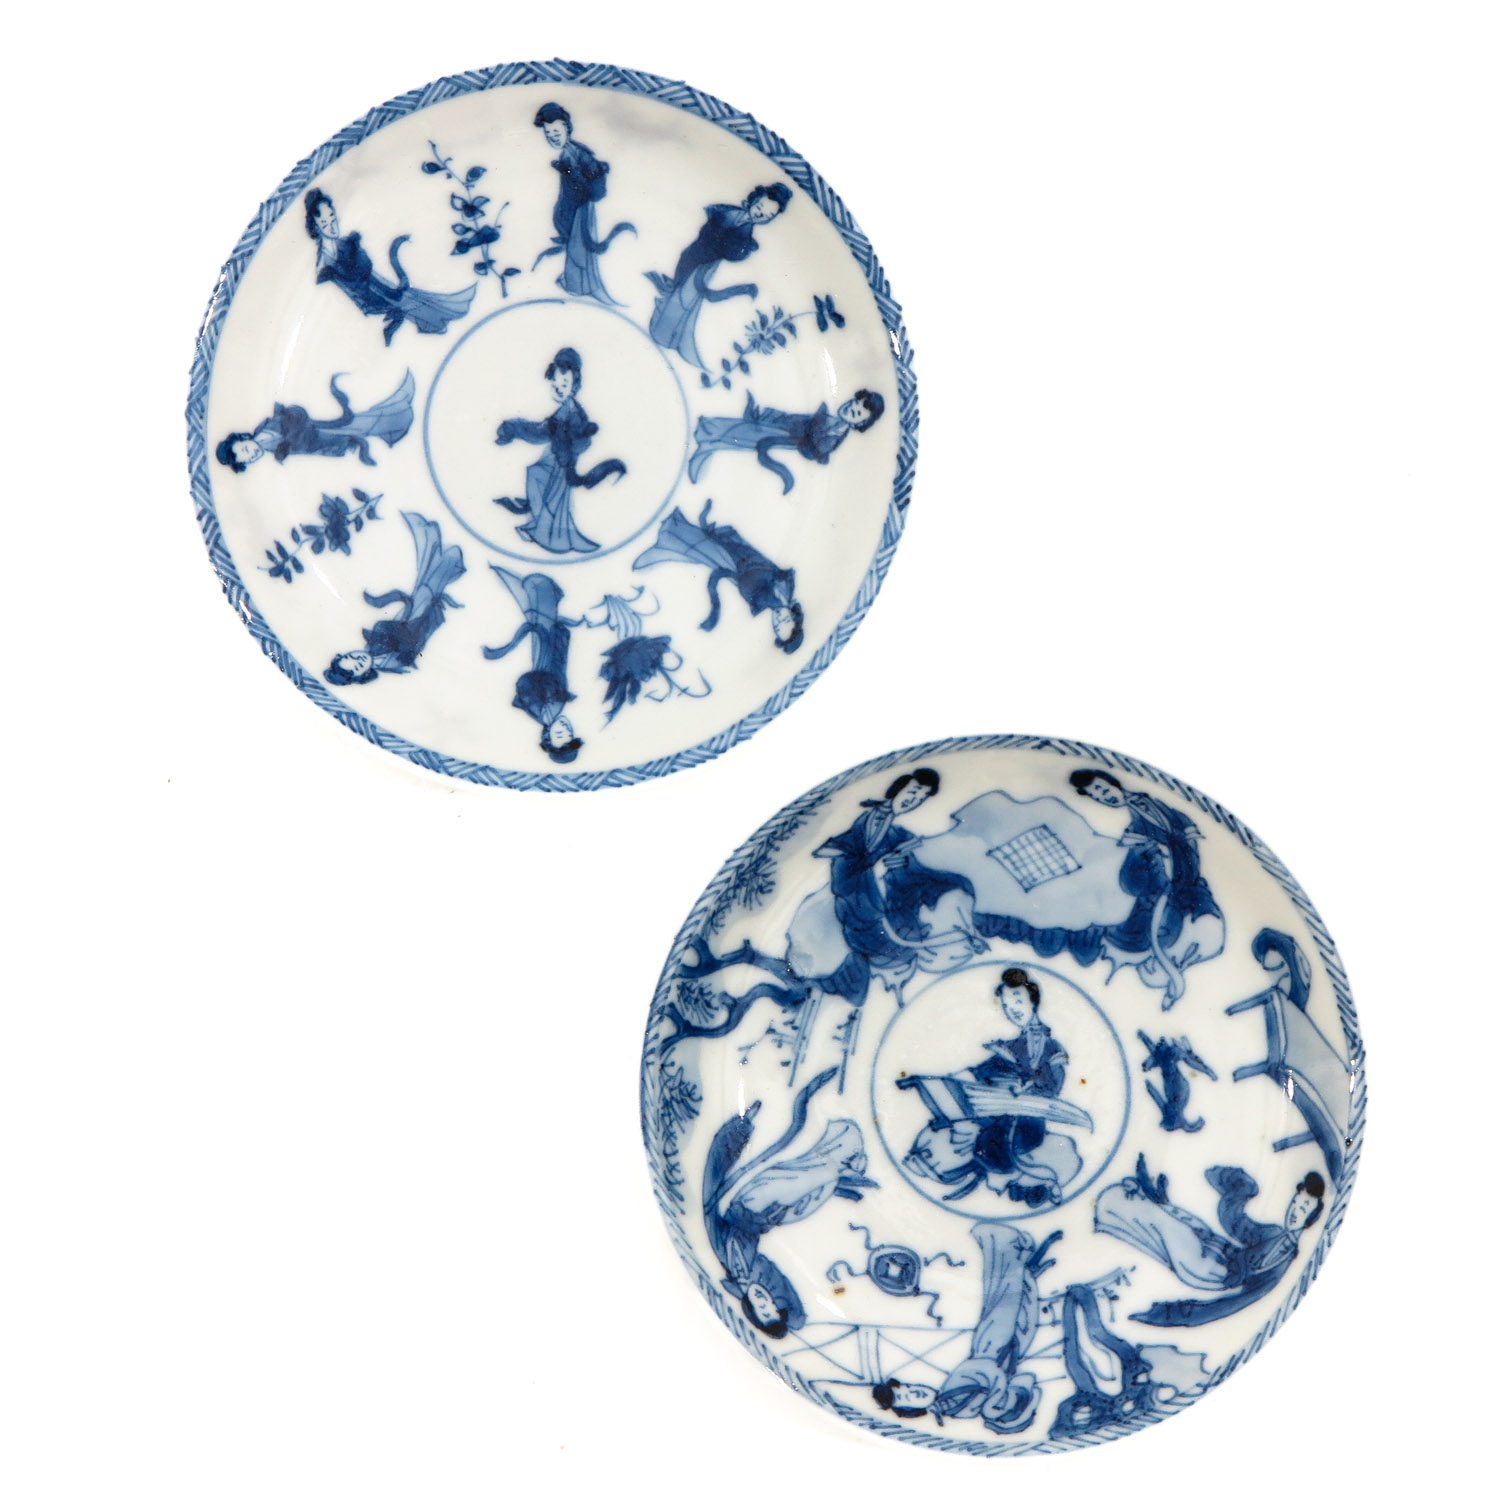 A Collection of 4 Small Blue and White Plates - Image 5 of 10